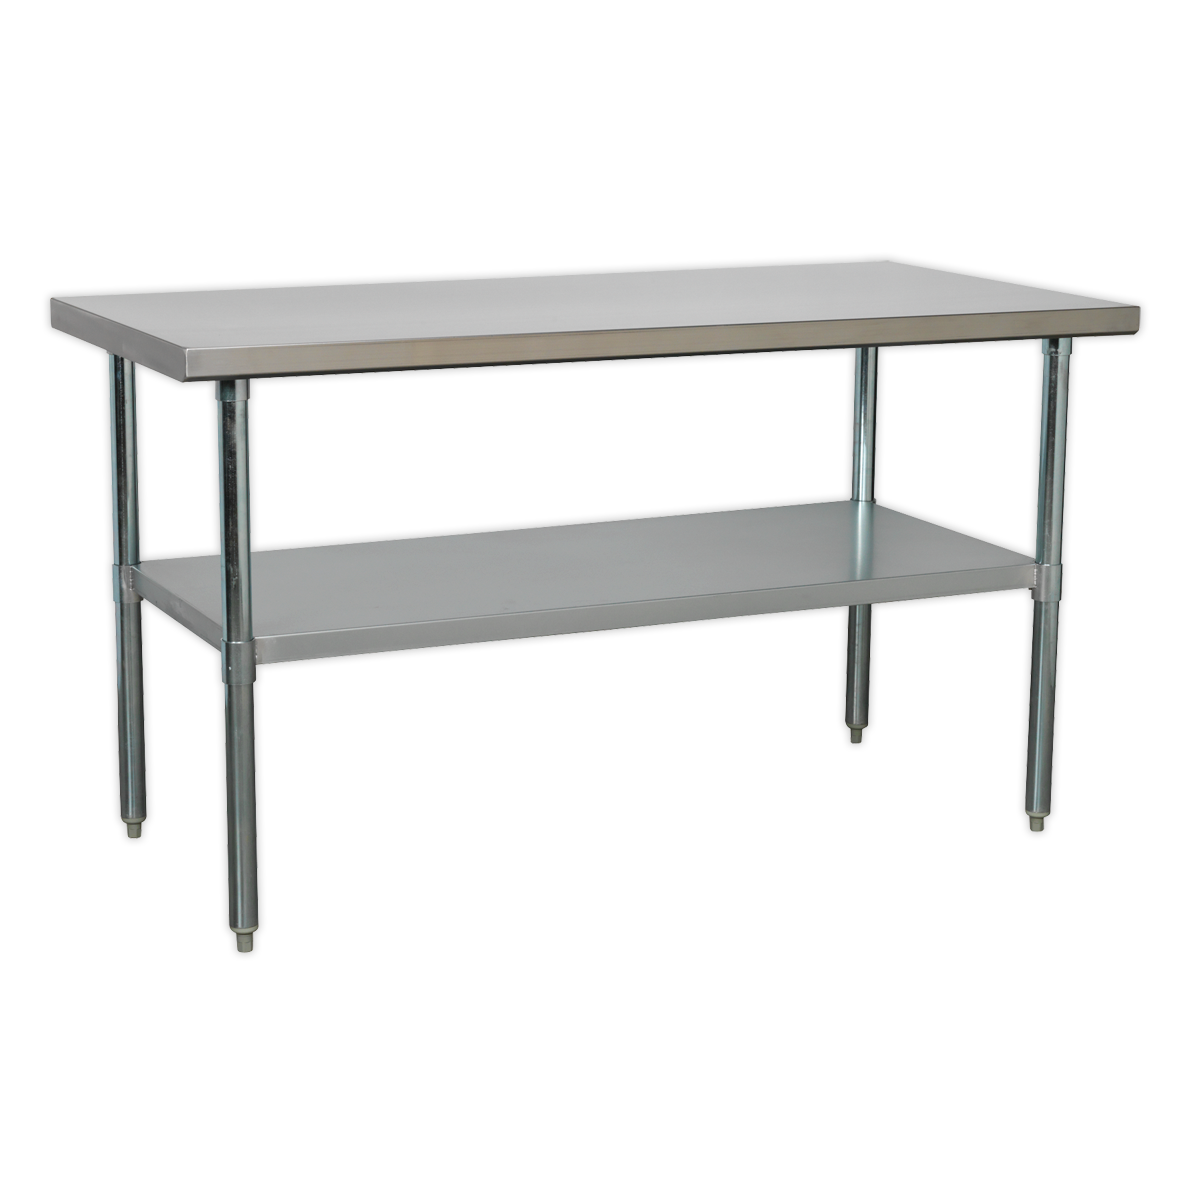 Sealey Stainless Steel Workbench 1.5m